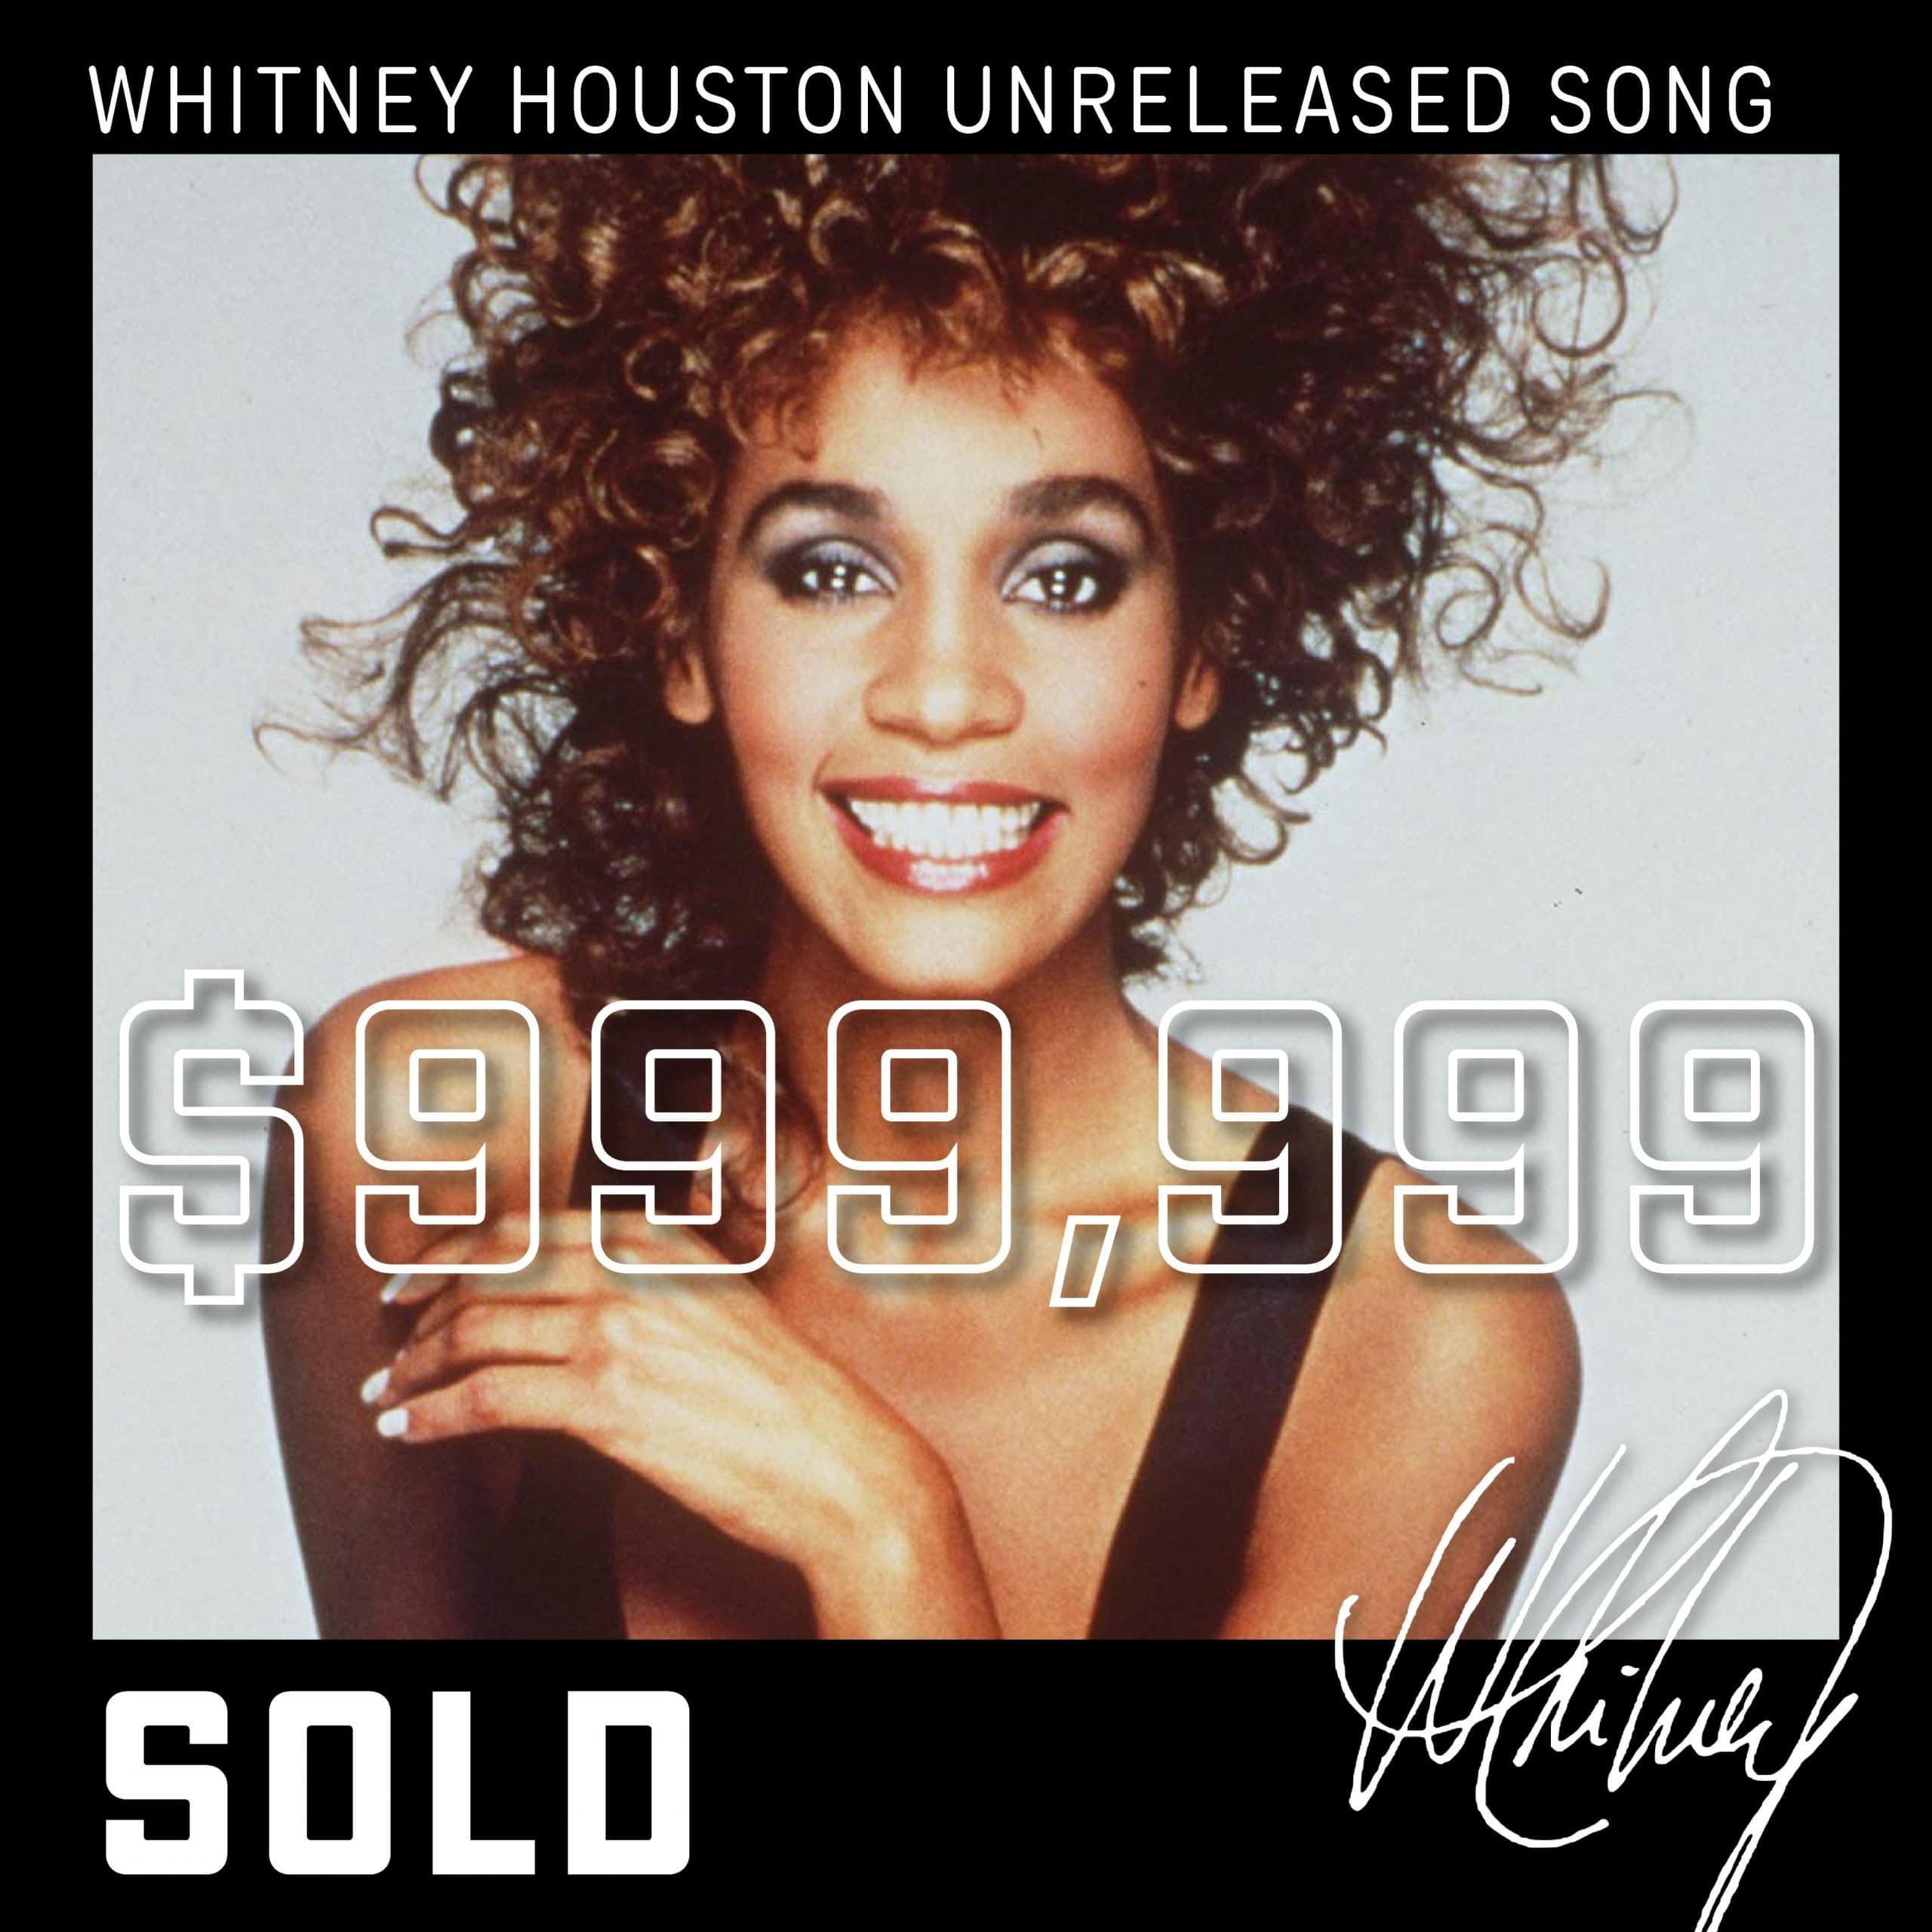 picture depicts Whitney Houston